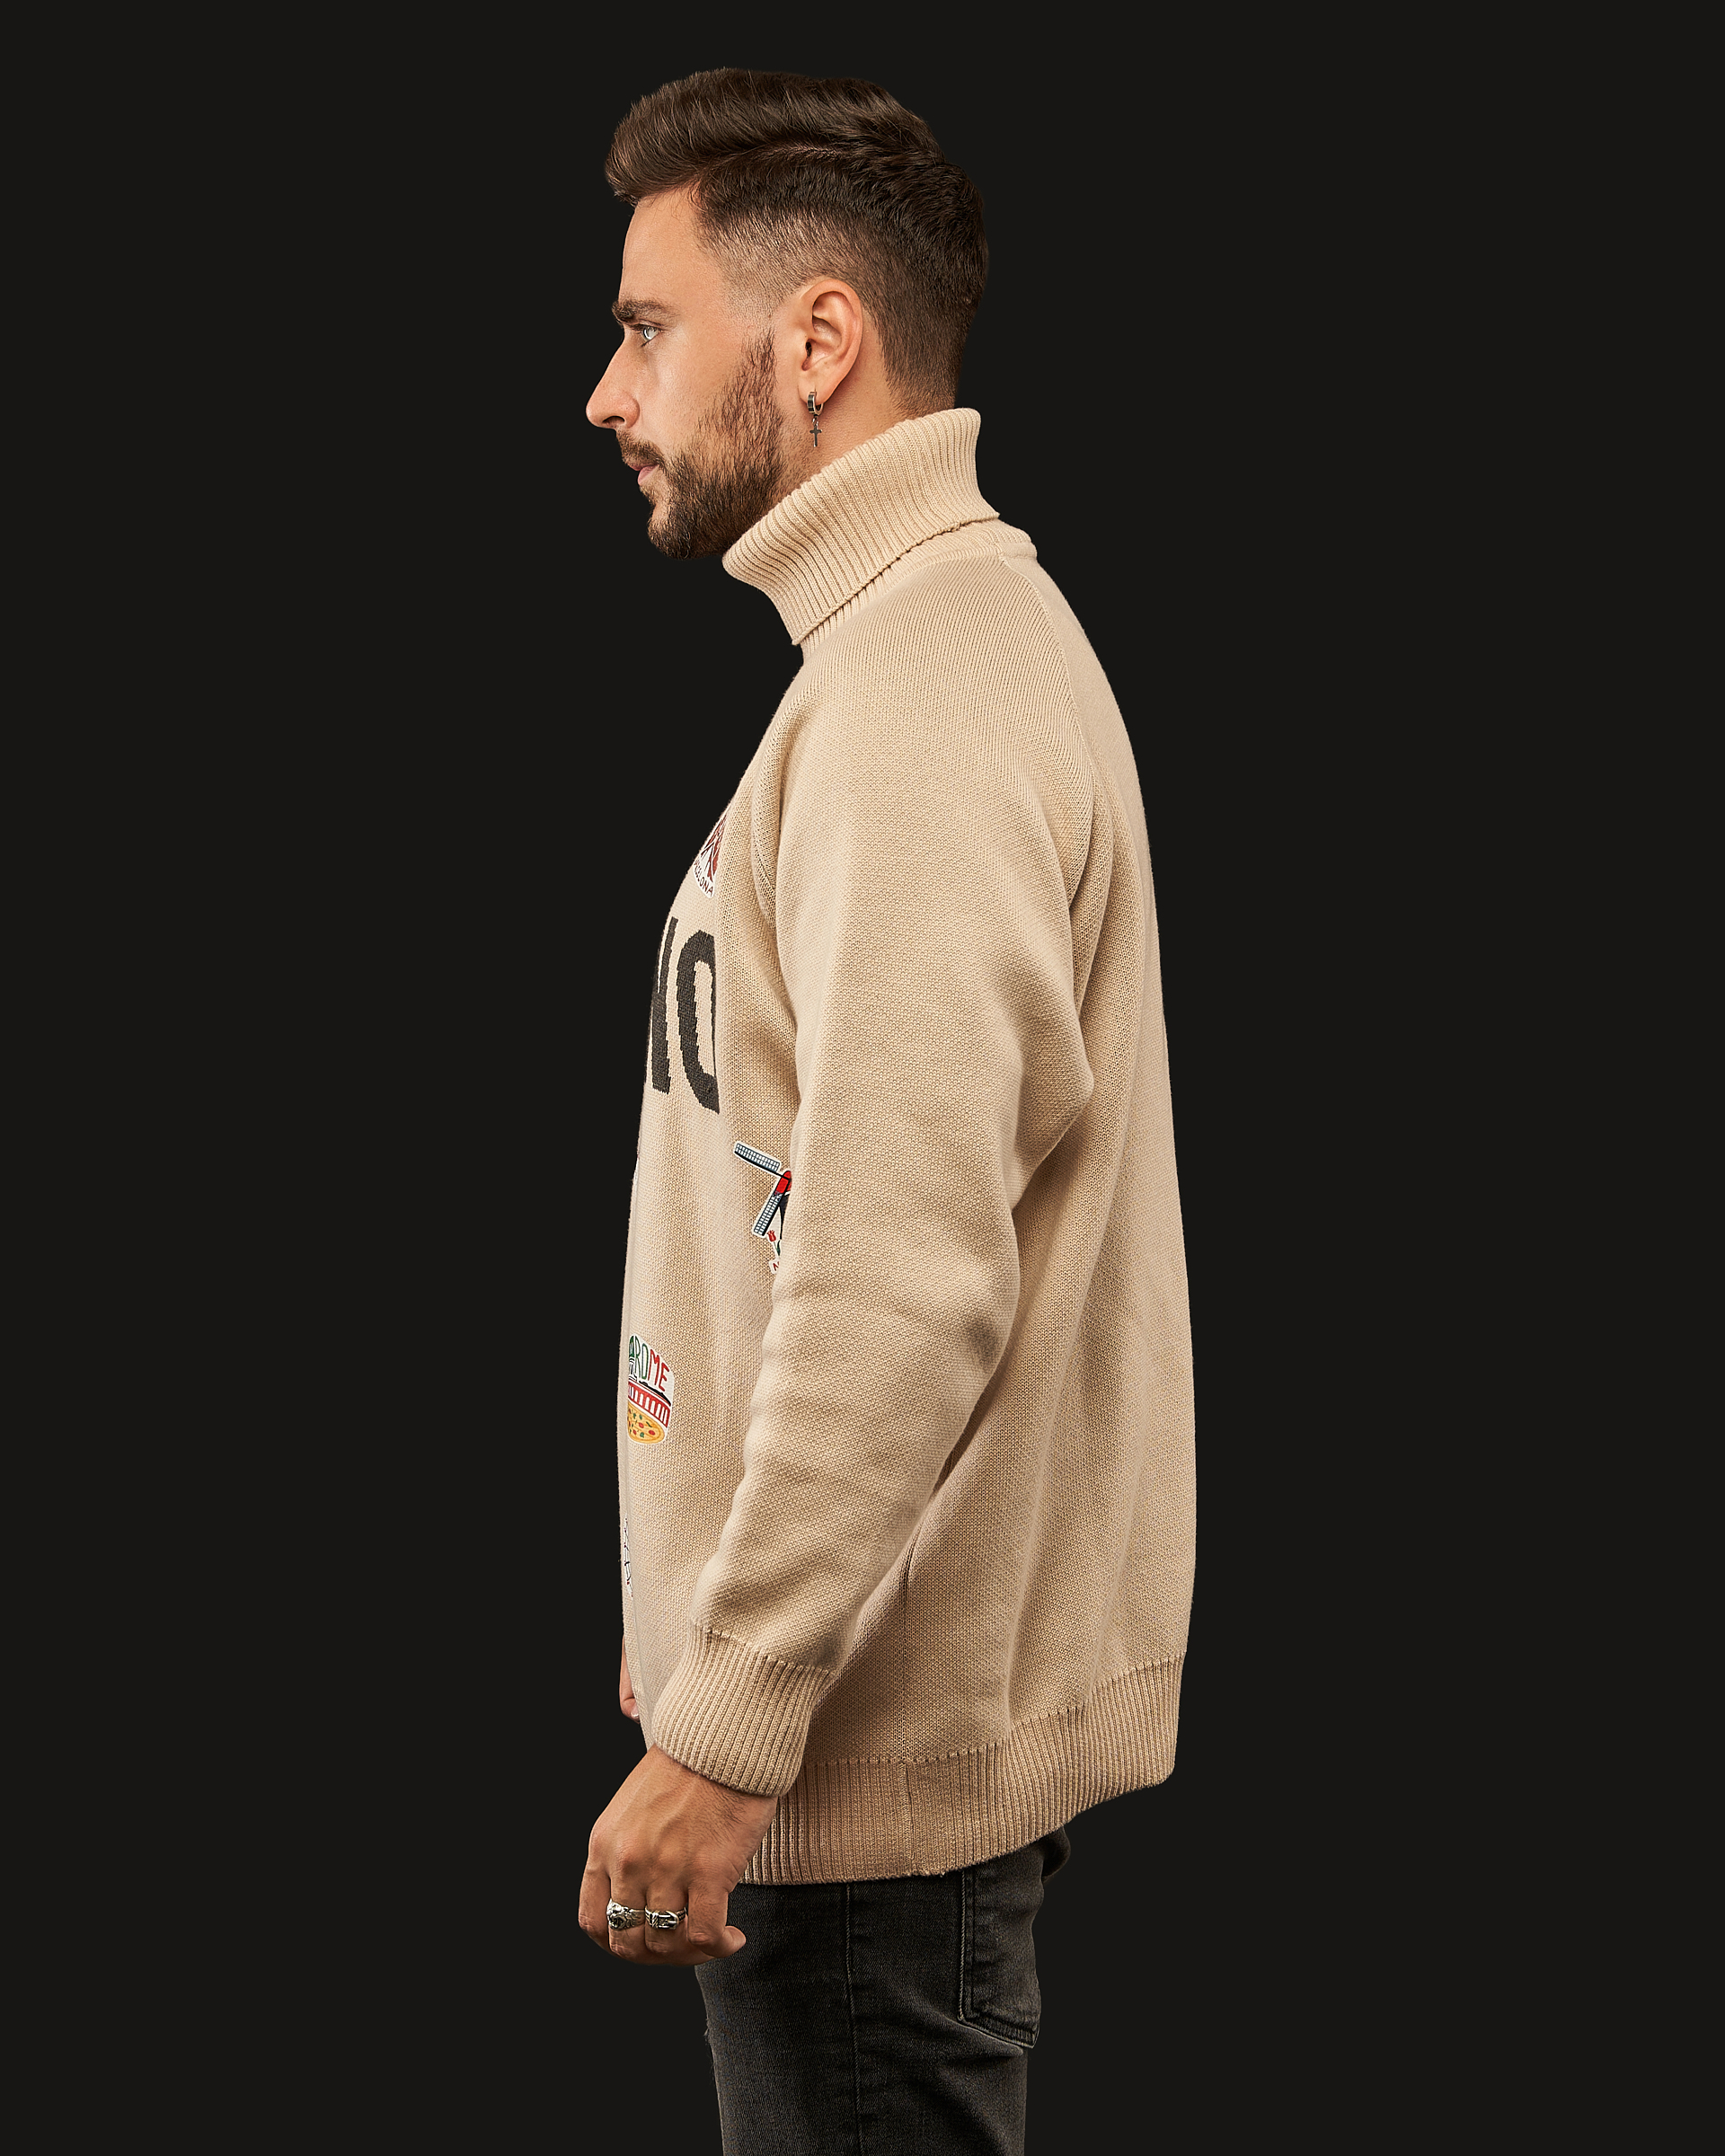 Sweater (beige) Image: https://ohueno-official.com/wp-content/uploads/m01949-1.jpg